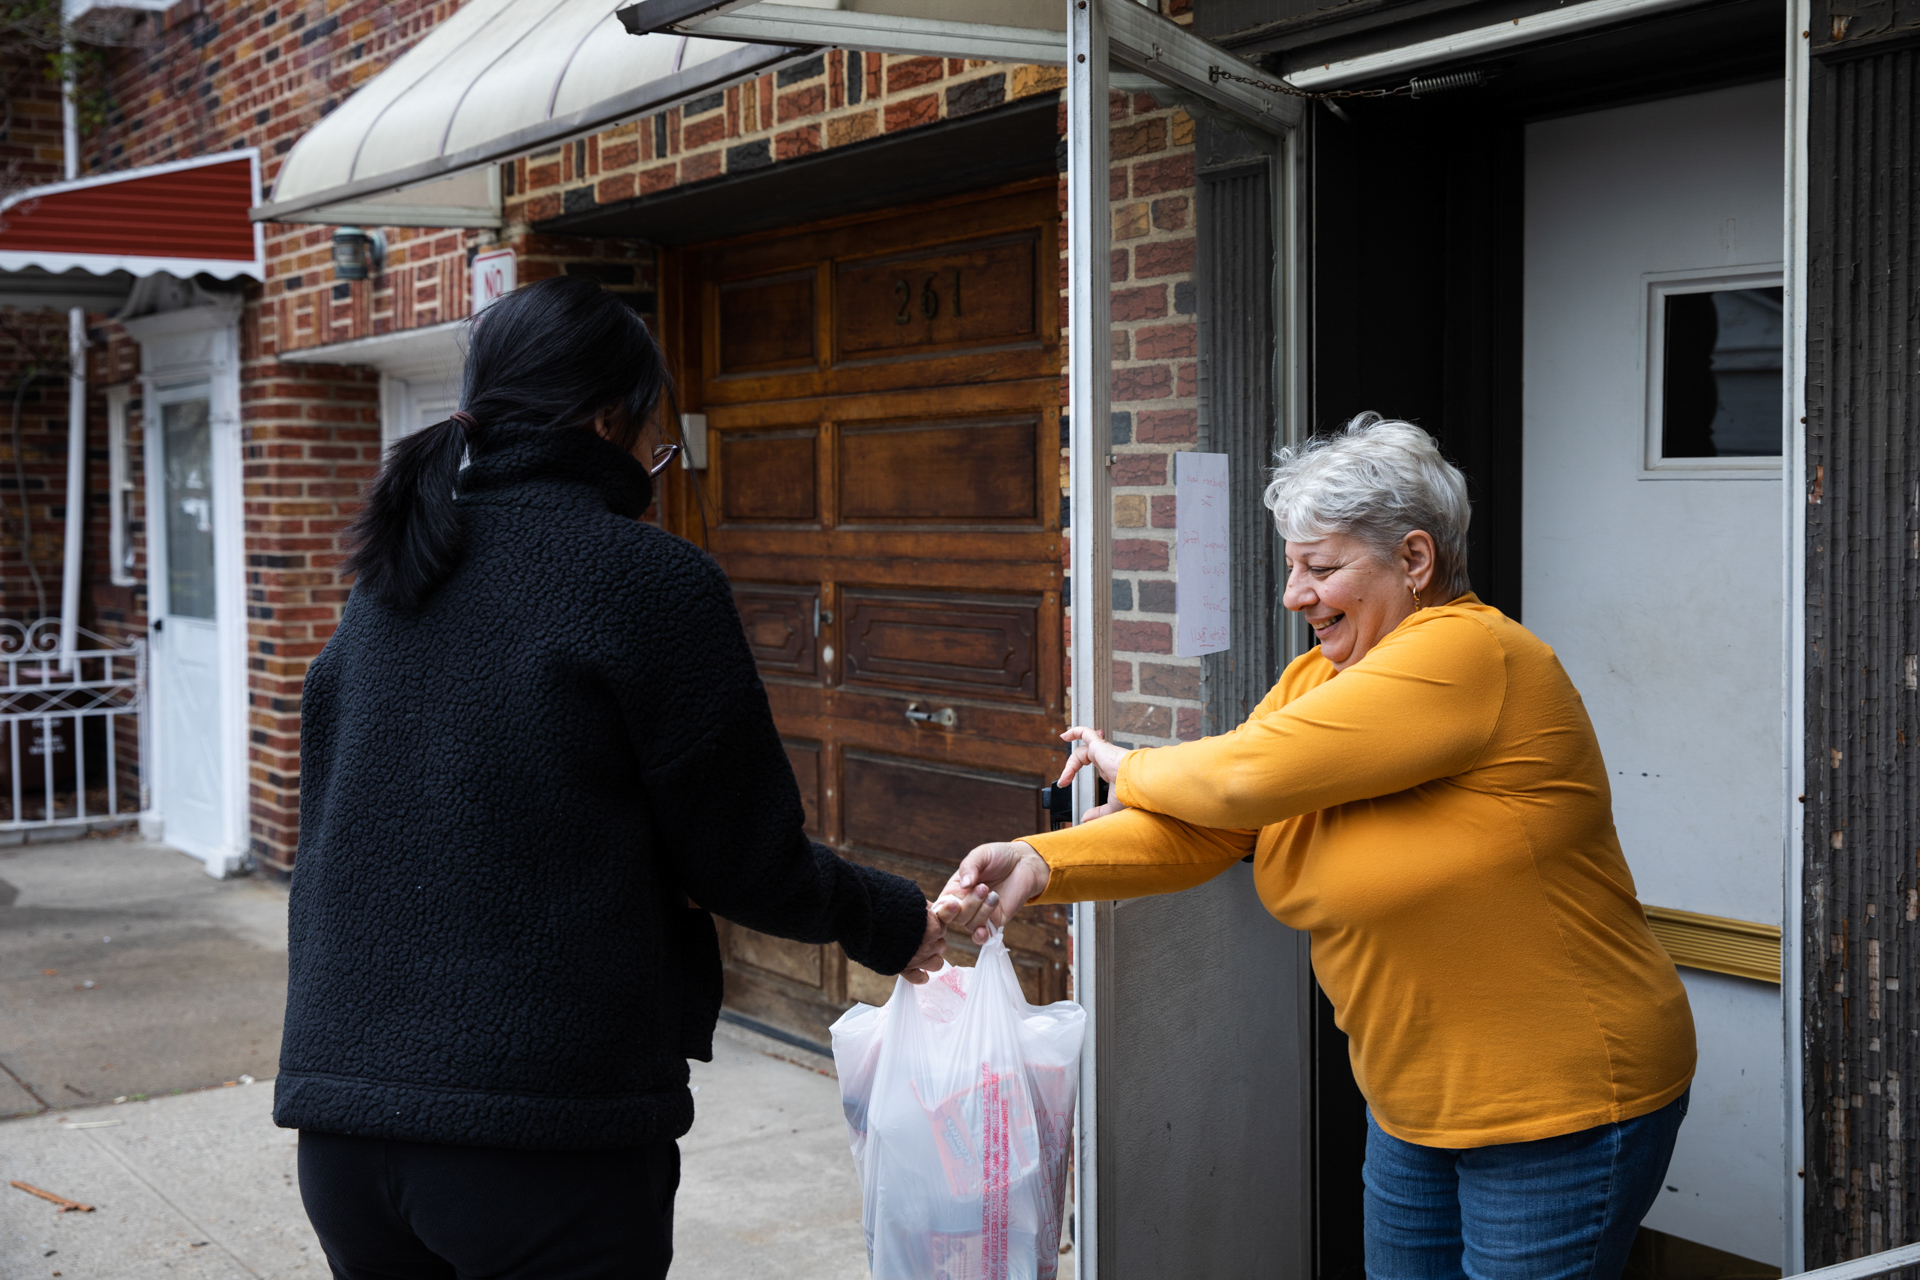 Theresa Monforte-Caraballo of Grandma’s Love hands a care package to a volunteer with Bay Ridge Cares. The volunteer will take the food to a family in Gravesend who can’t leave their home during the coronavirus pandemic. Photo: Paul Frangipane/Brooklyn Eagle